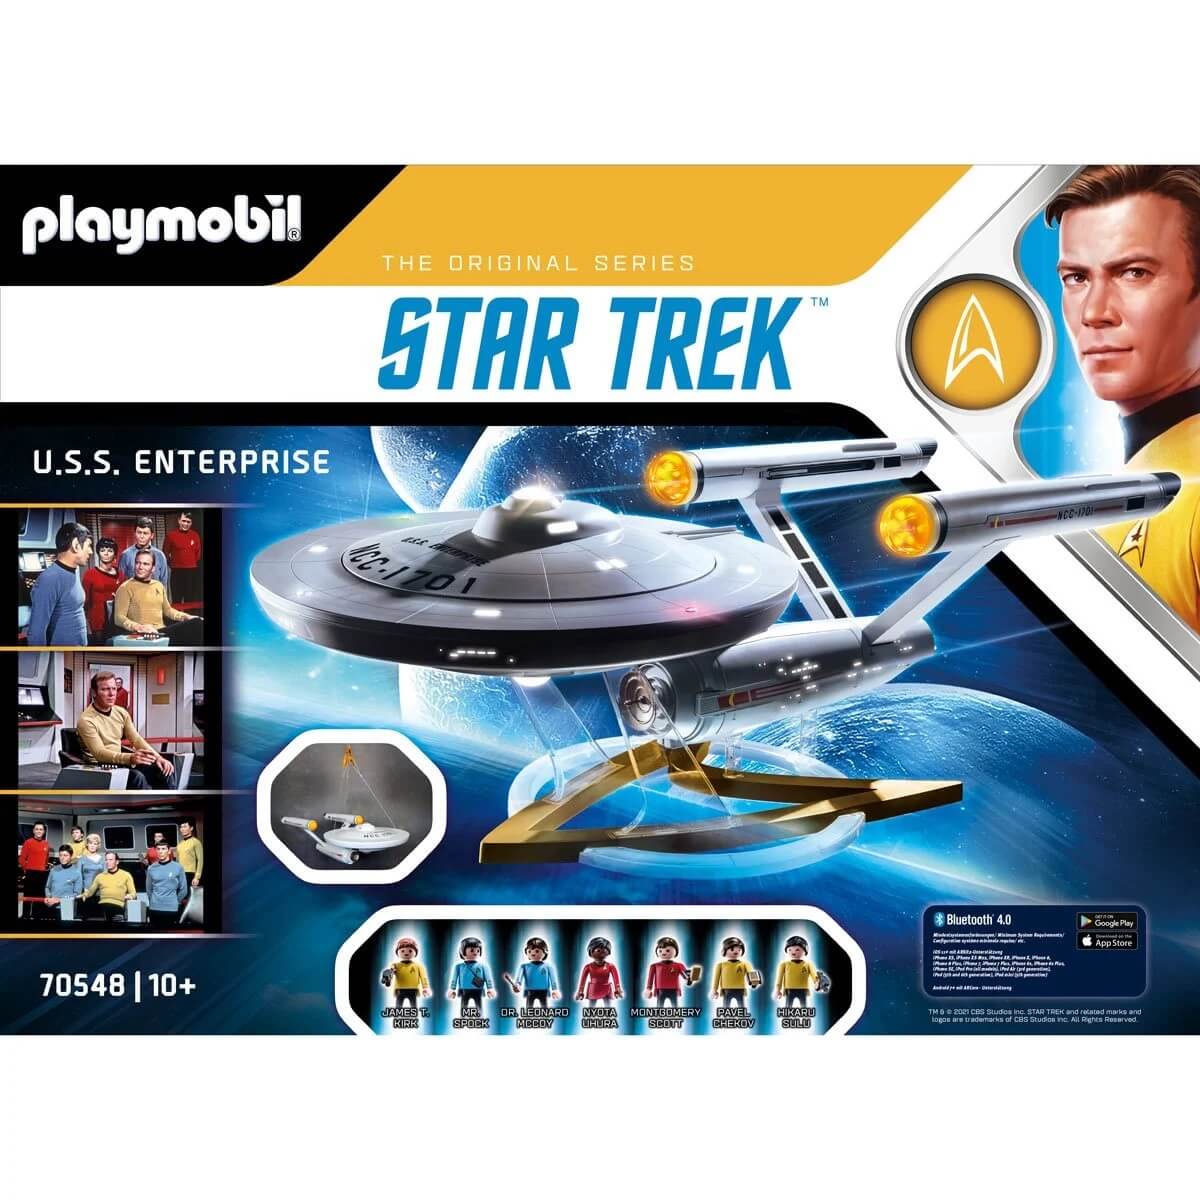 Package back of the Playmobil Star Trek Enterprise Set shows the ship on a display stand, scenes from TOS and all seven figures included.